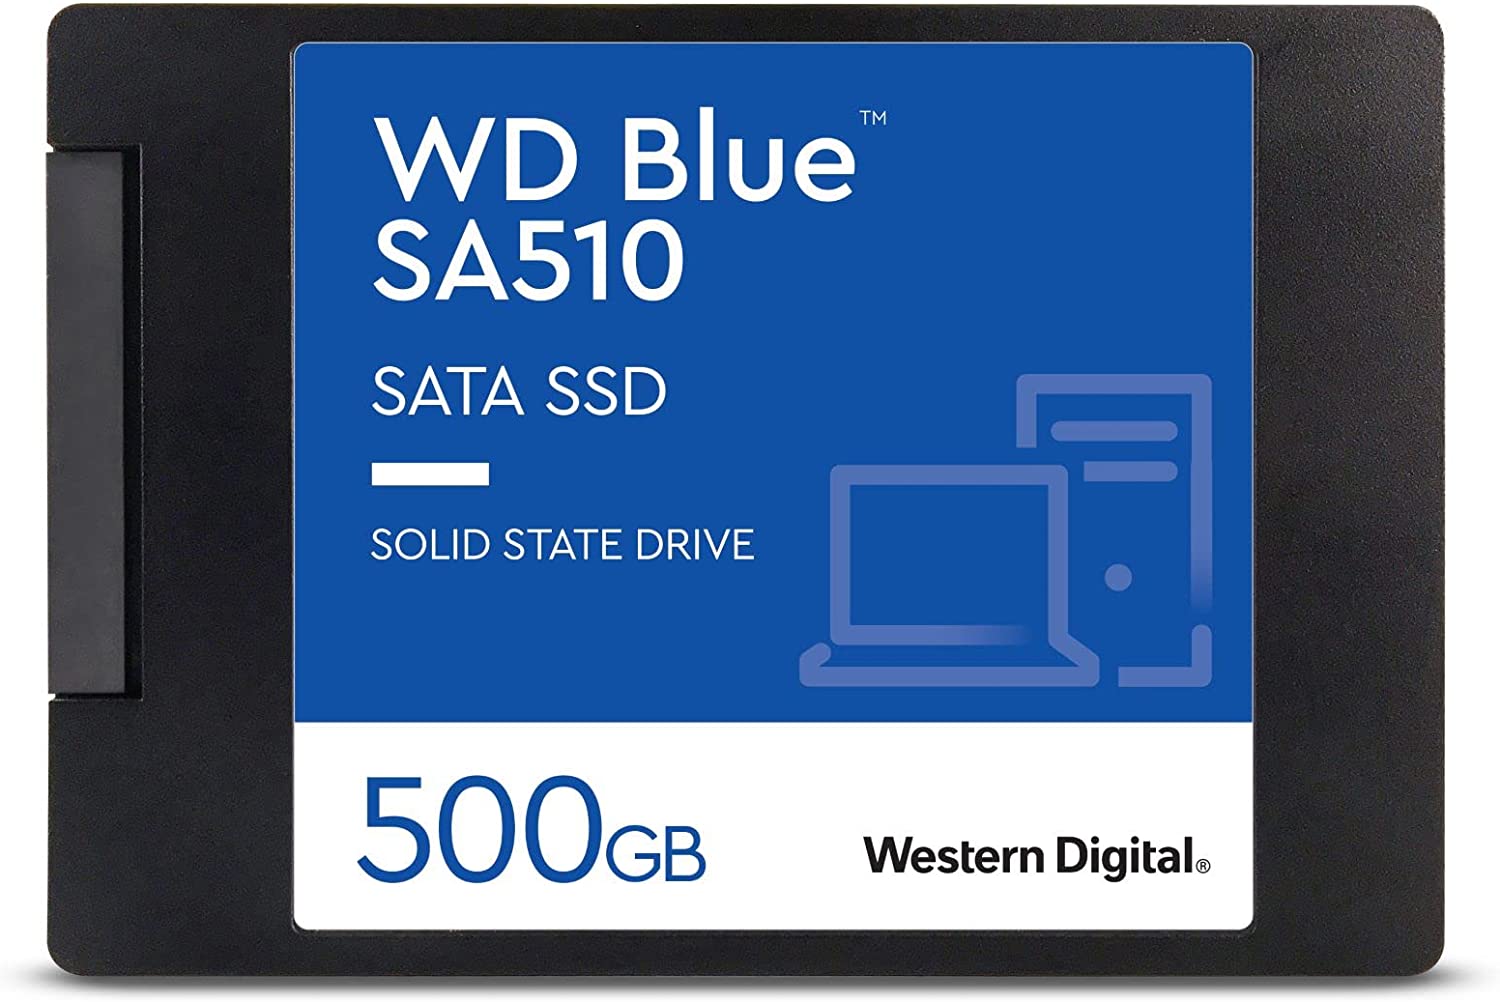 What Model Is The 0J4Vr 512GB SATA Class 20 Solid State Drive